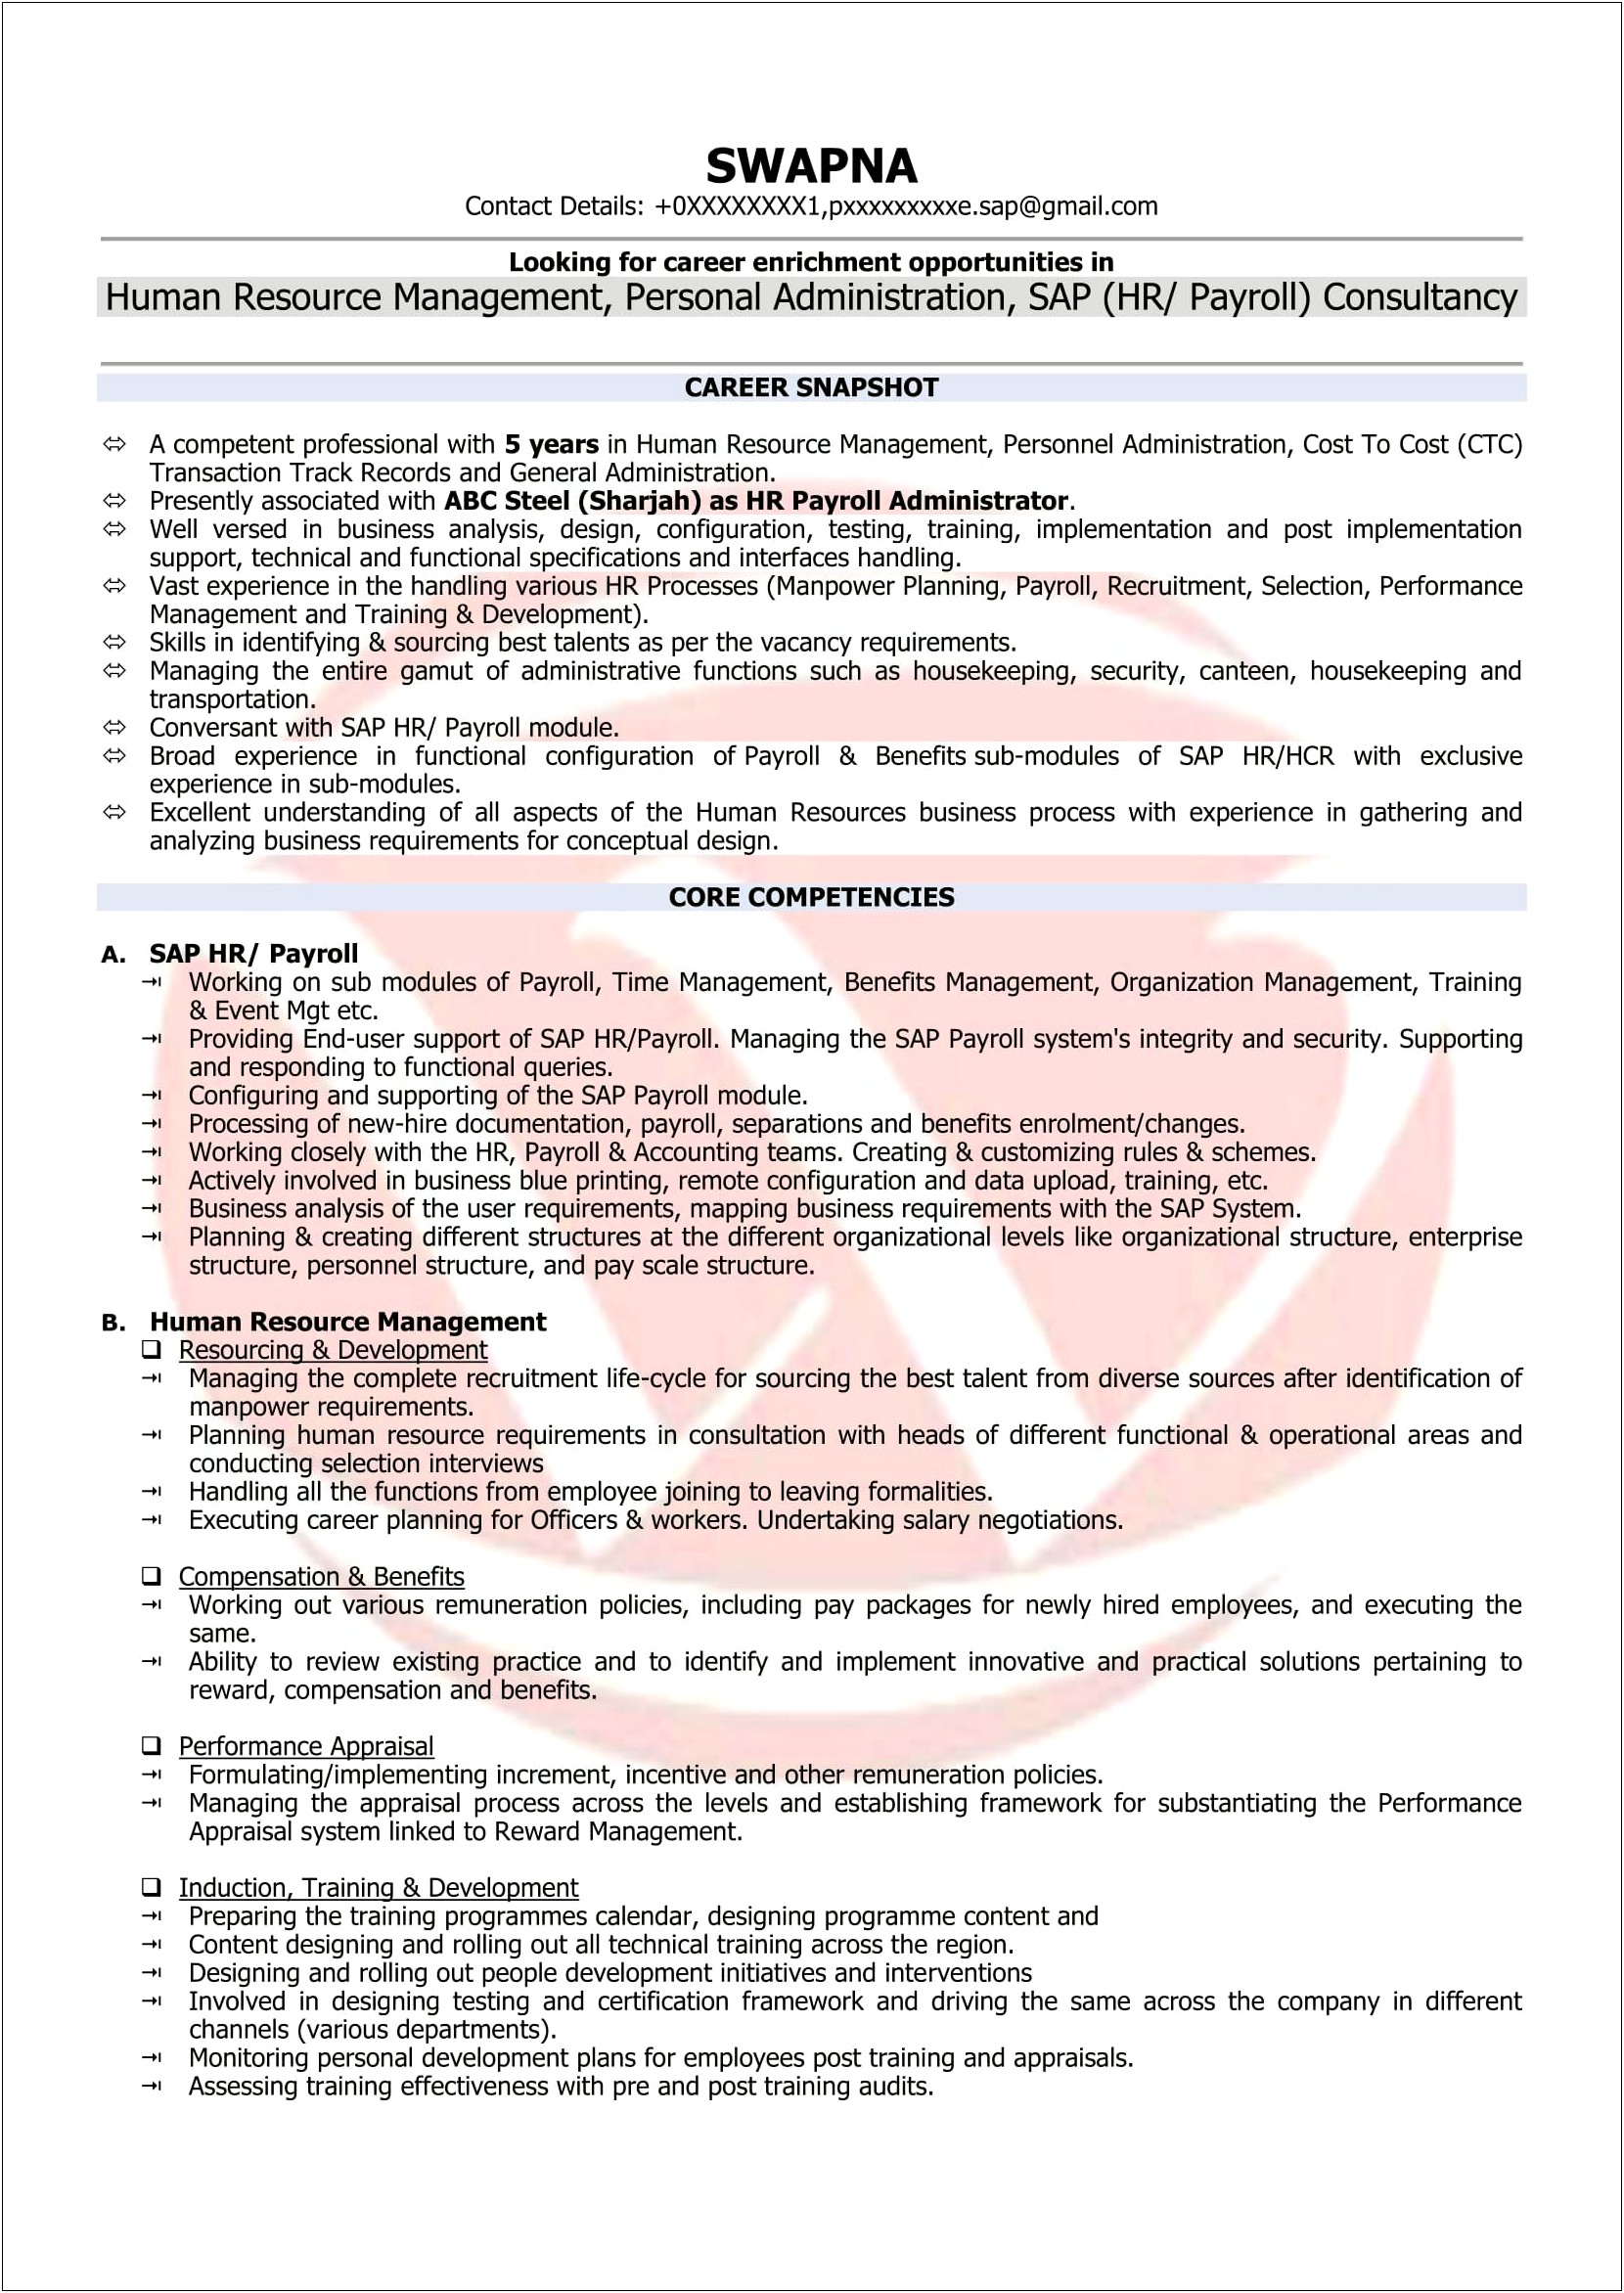 Sample Resume For Indian Navy